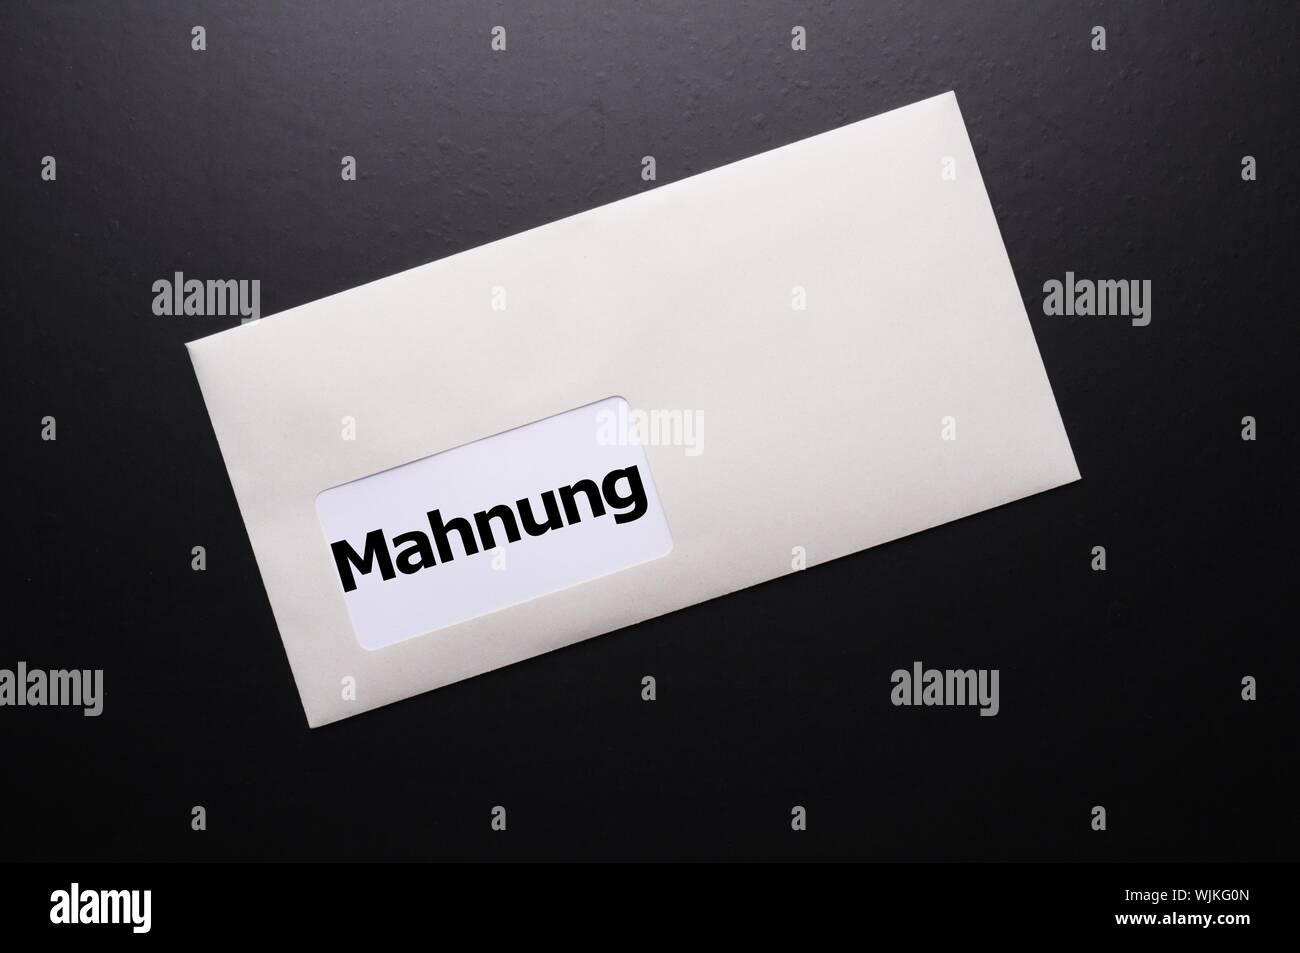 dunning or reminder concept with post letter and word Stock Photo